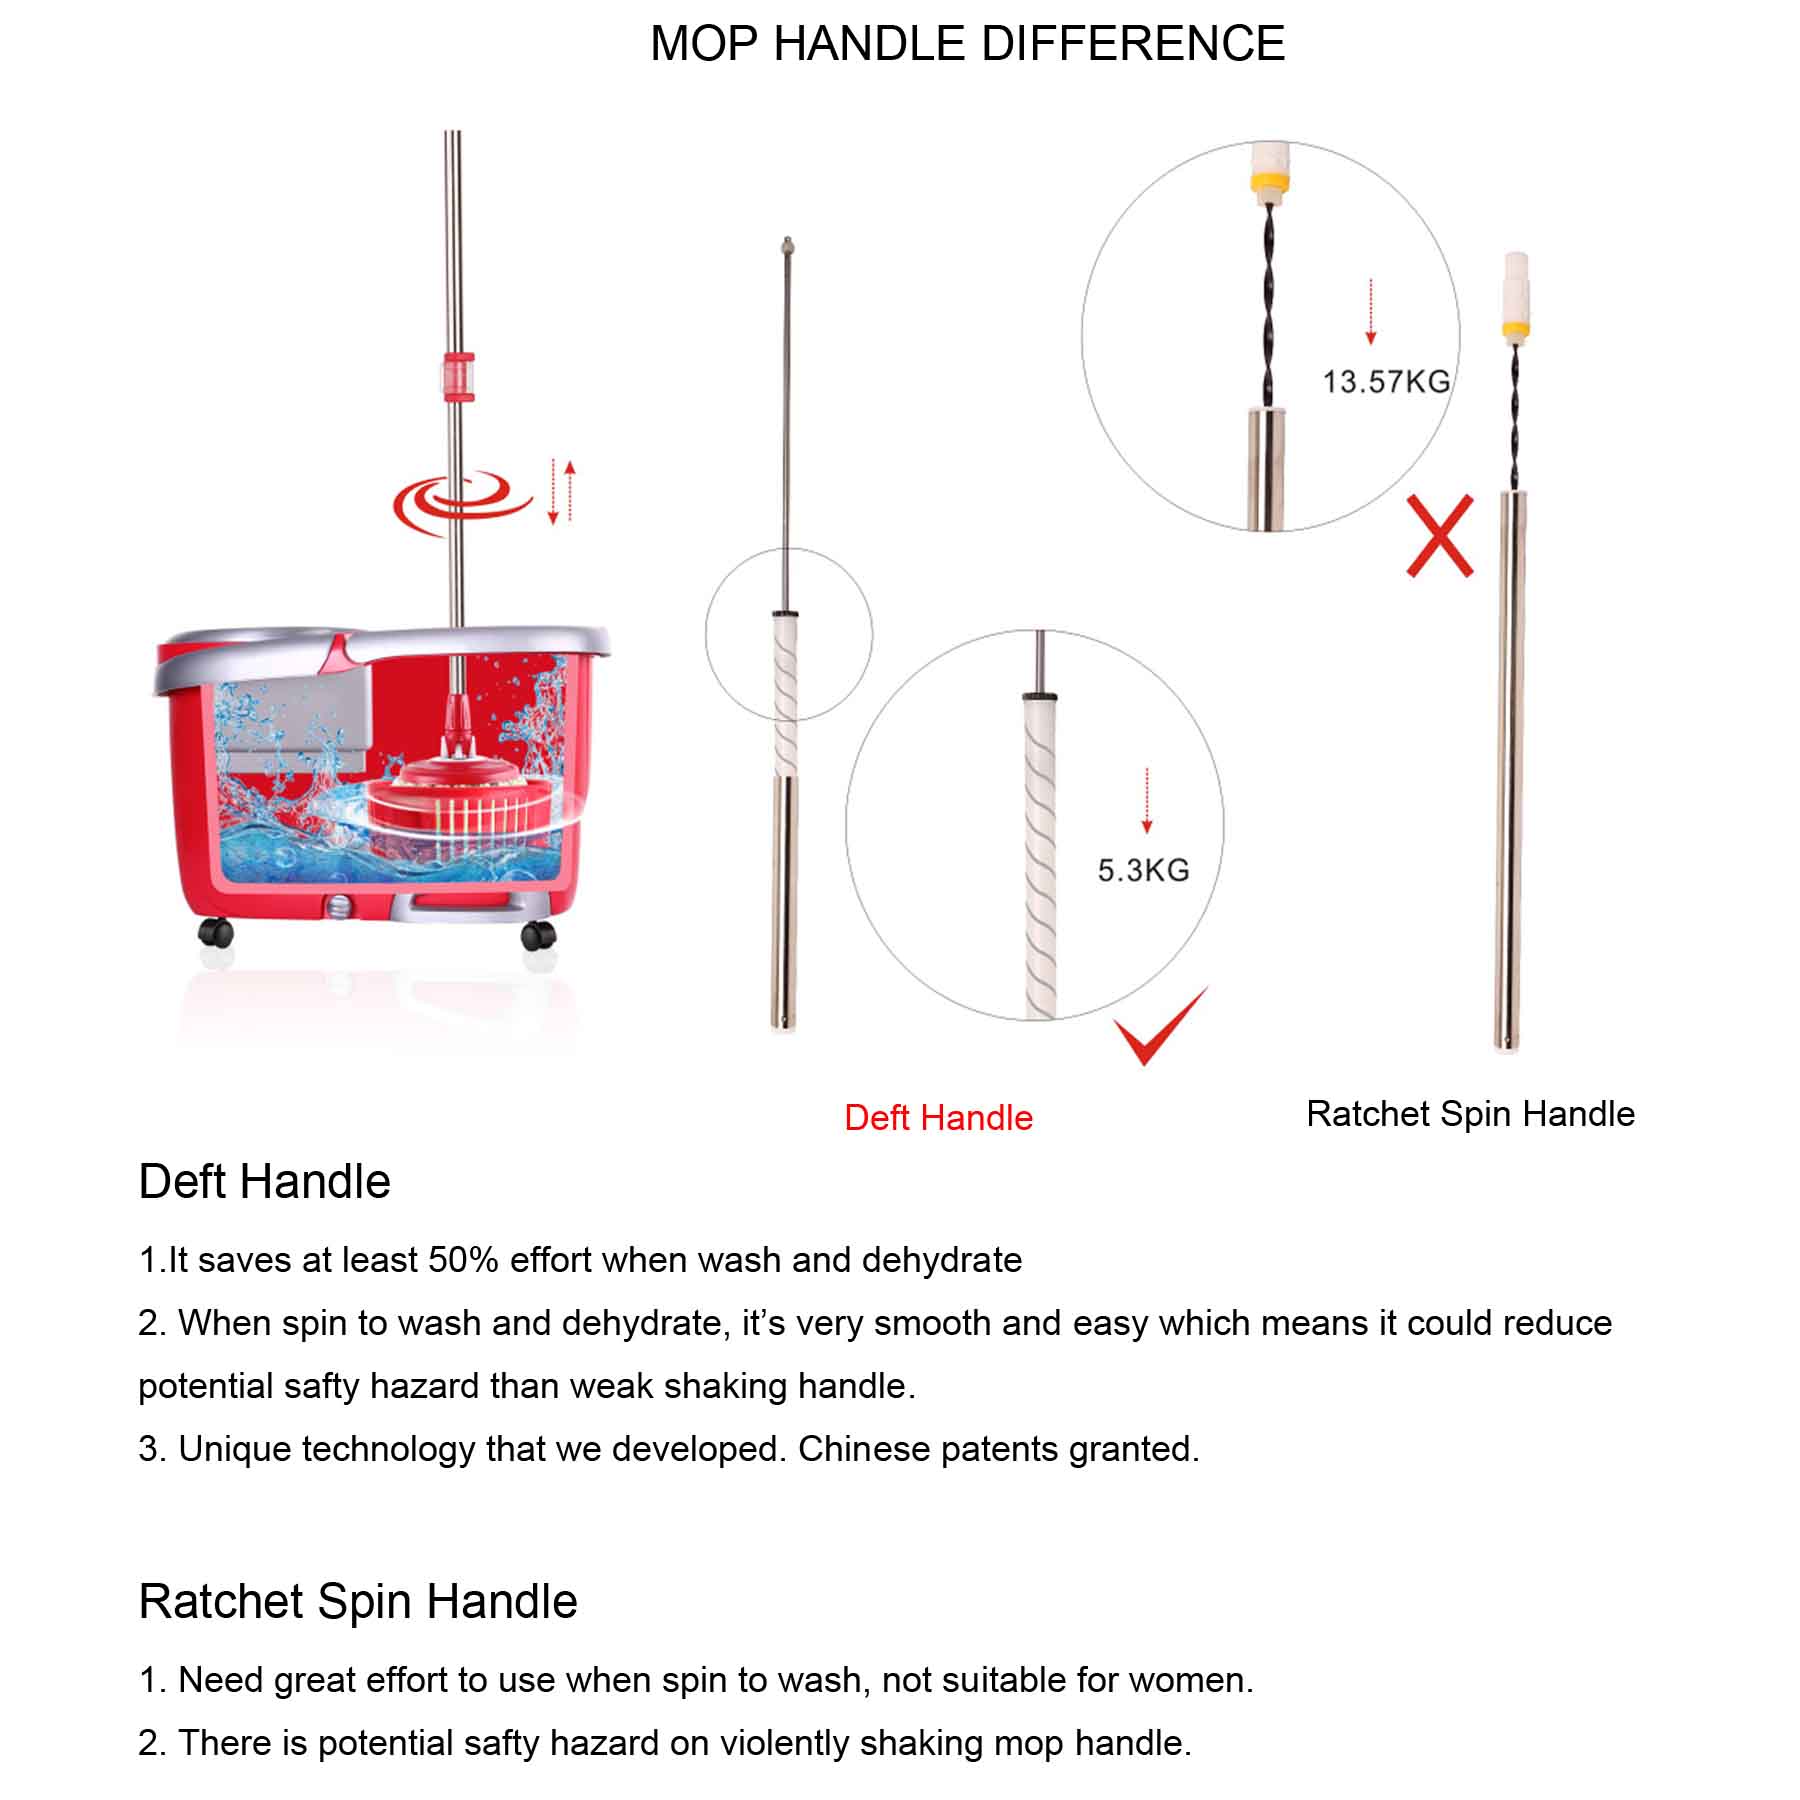 mop handle difference.jpg